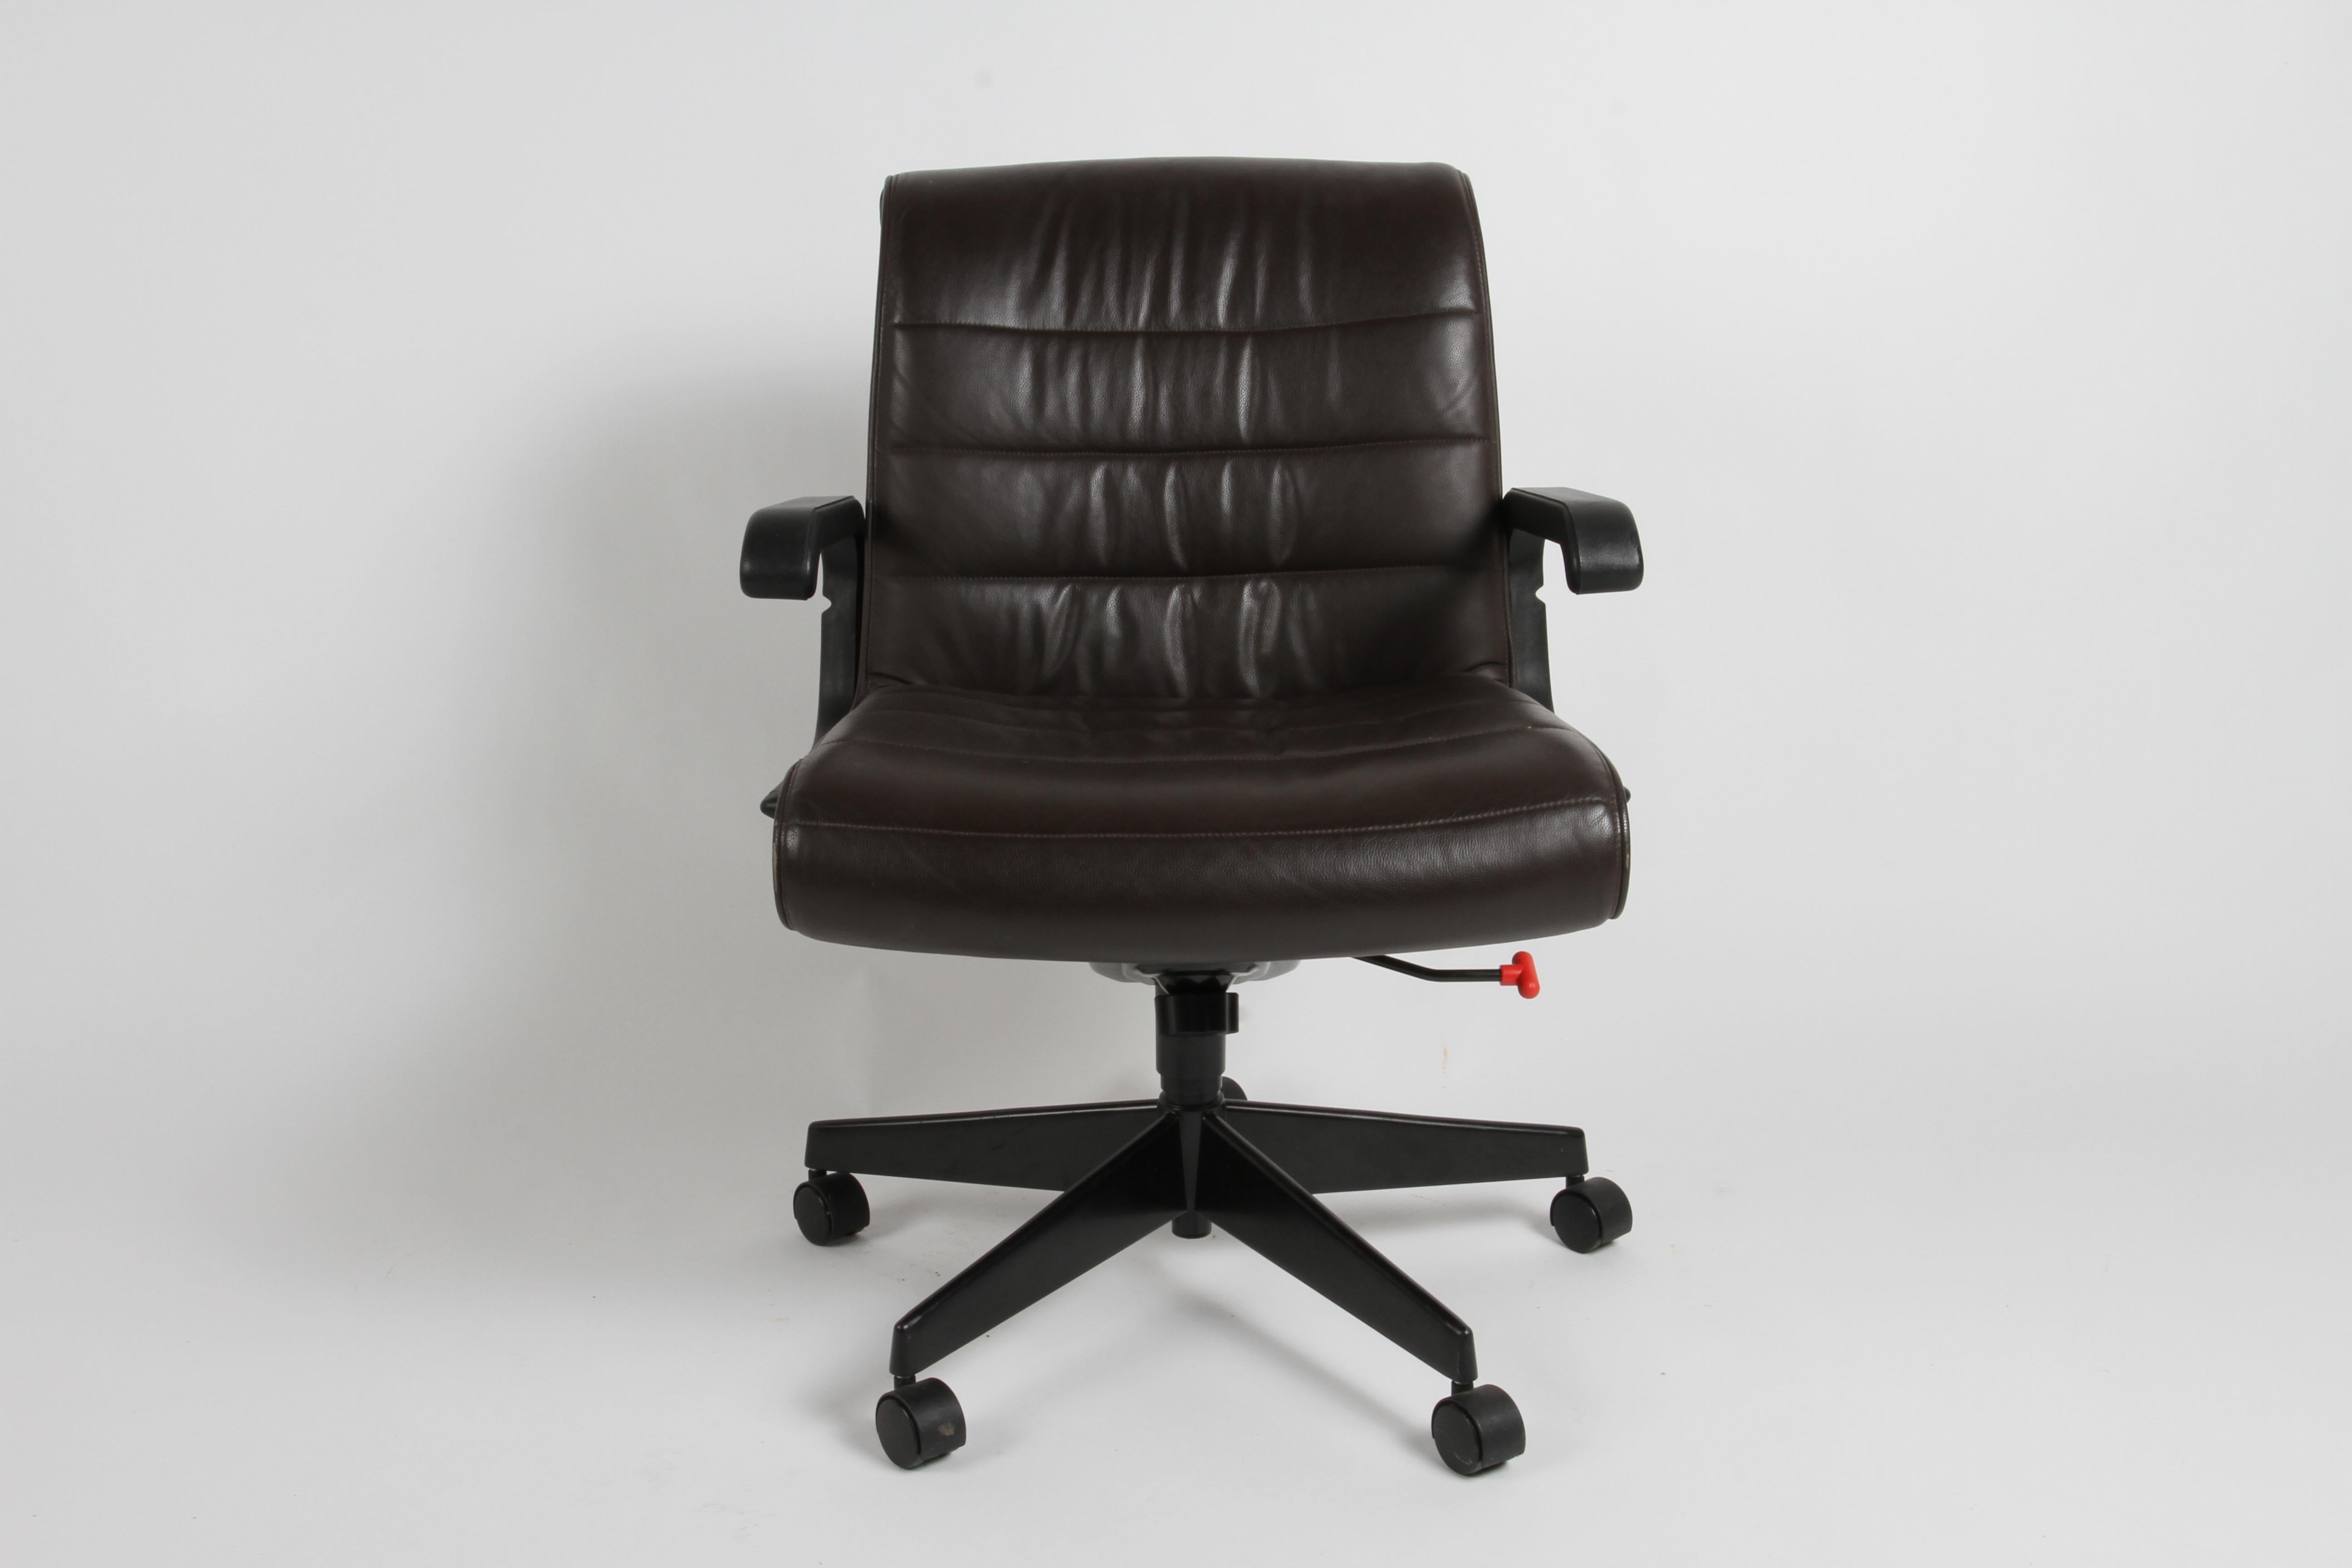 Designer Richard Sapper for Knoll the desk chairs in rich dark brown Spinneybeck leather, fully adjustable on 5 star bases on casters. Production in the 2001, this chair is no longer in production. Over in nice used condition, no rips or major wear